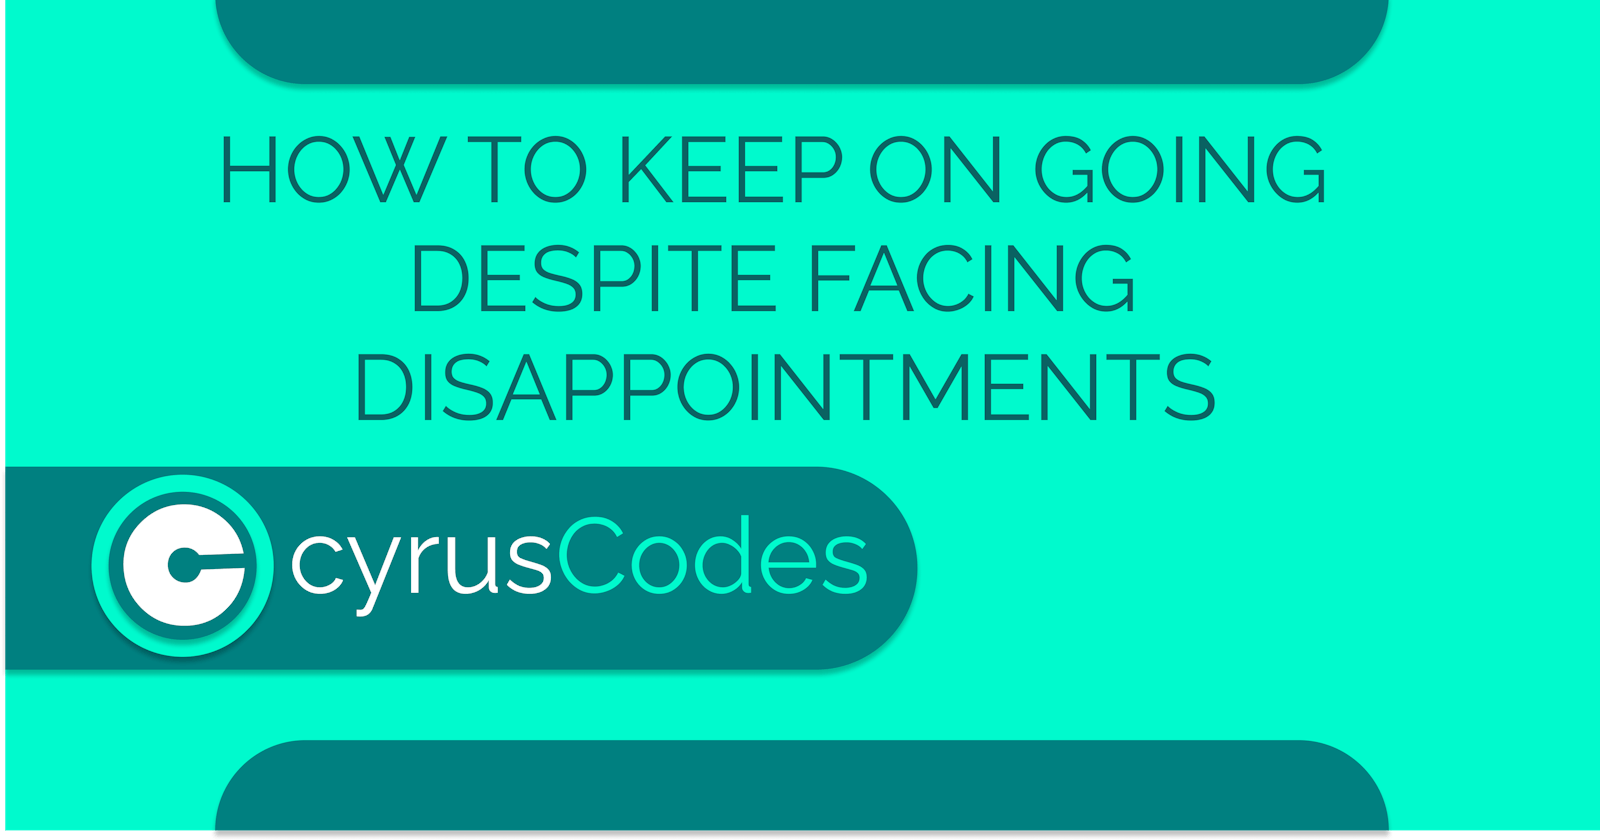 HOW TO KEEP ON GOING DESPITE DISAPPOINTMENTS